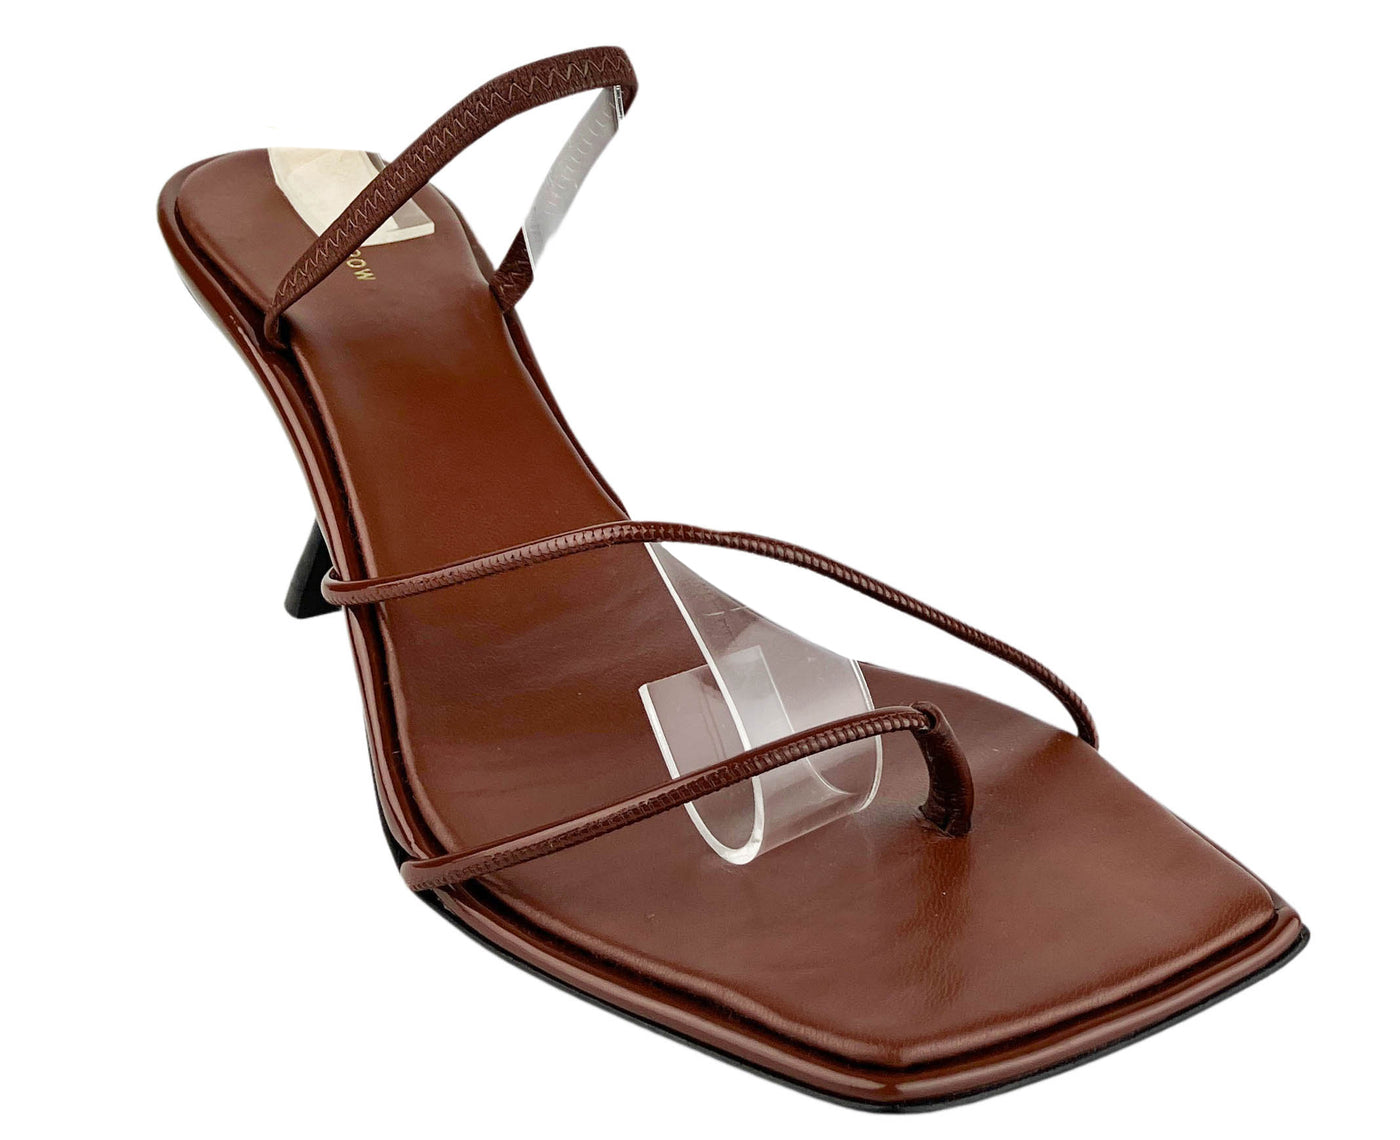 The Row Rai Sandals in Hazel - Discounts on The Row at UAL